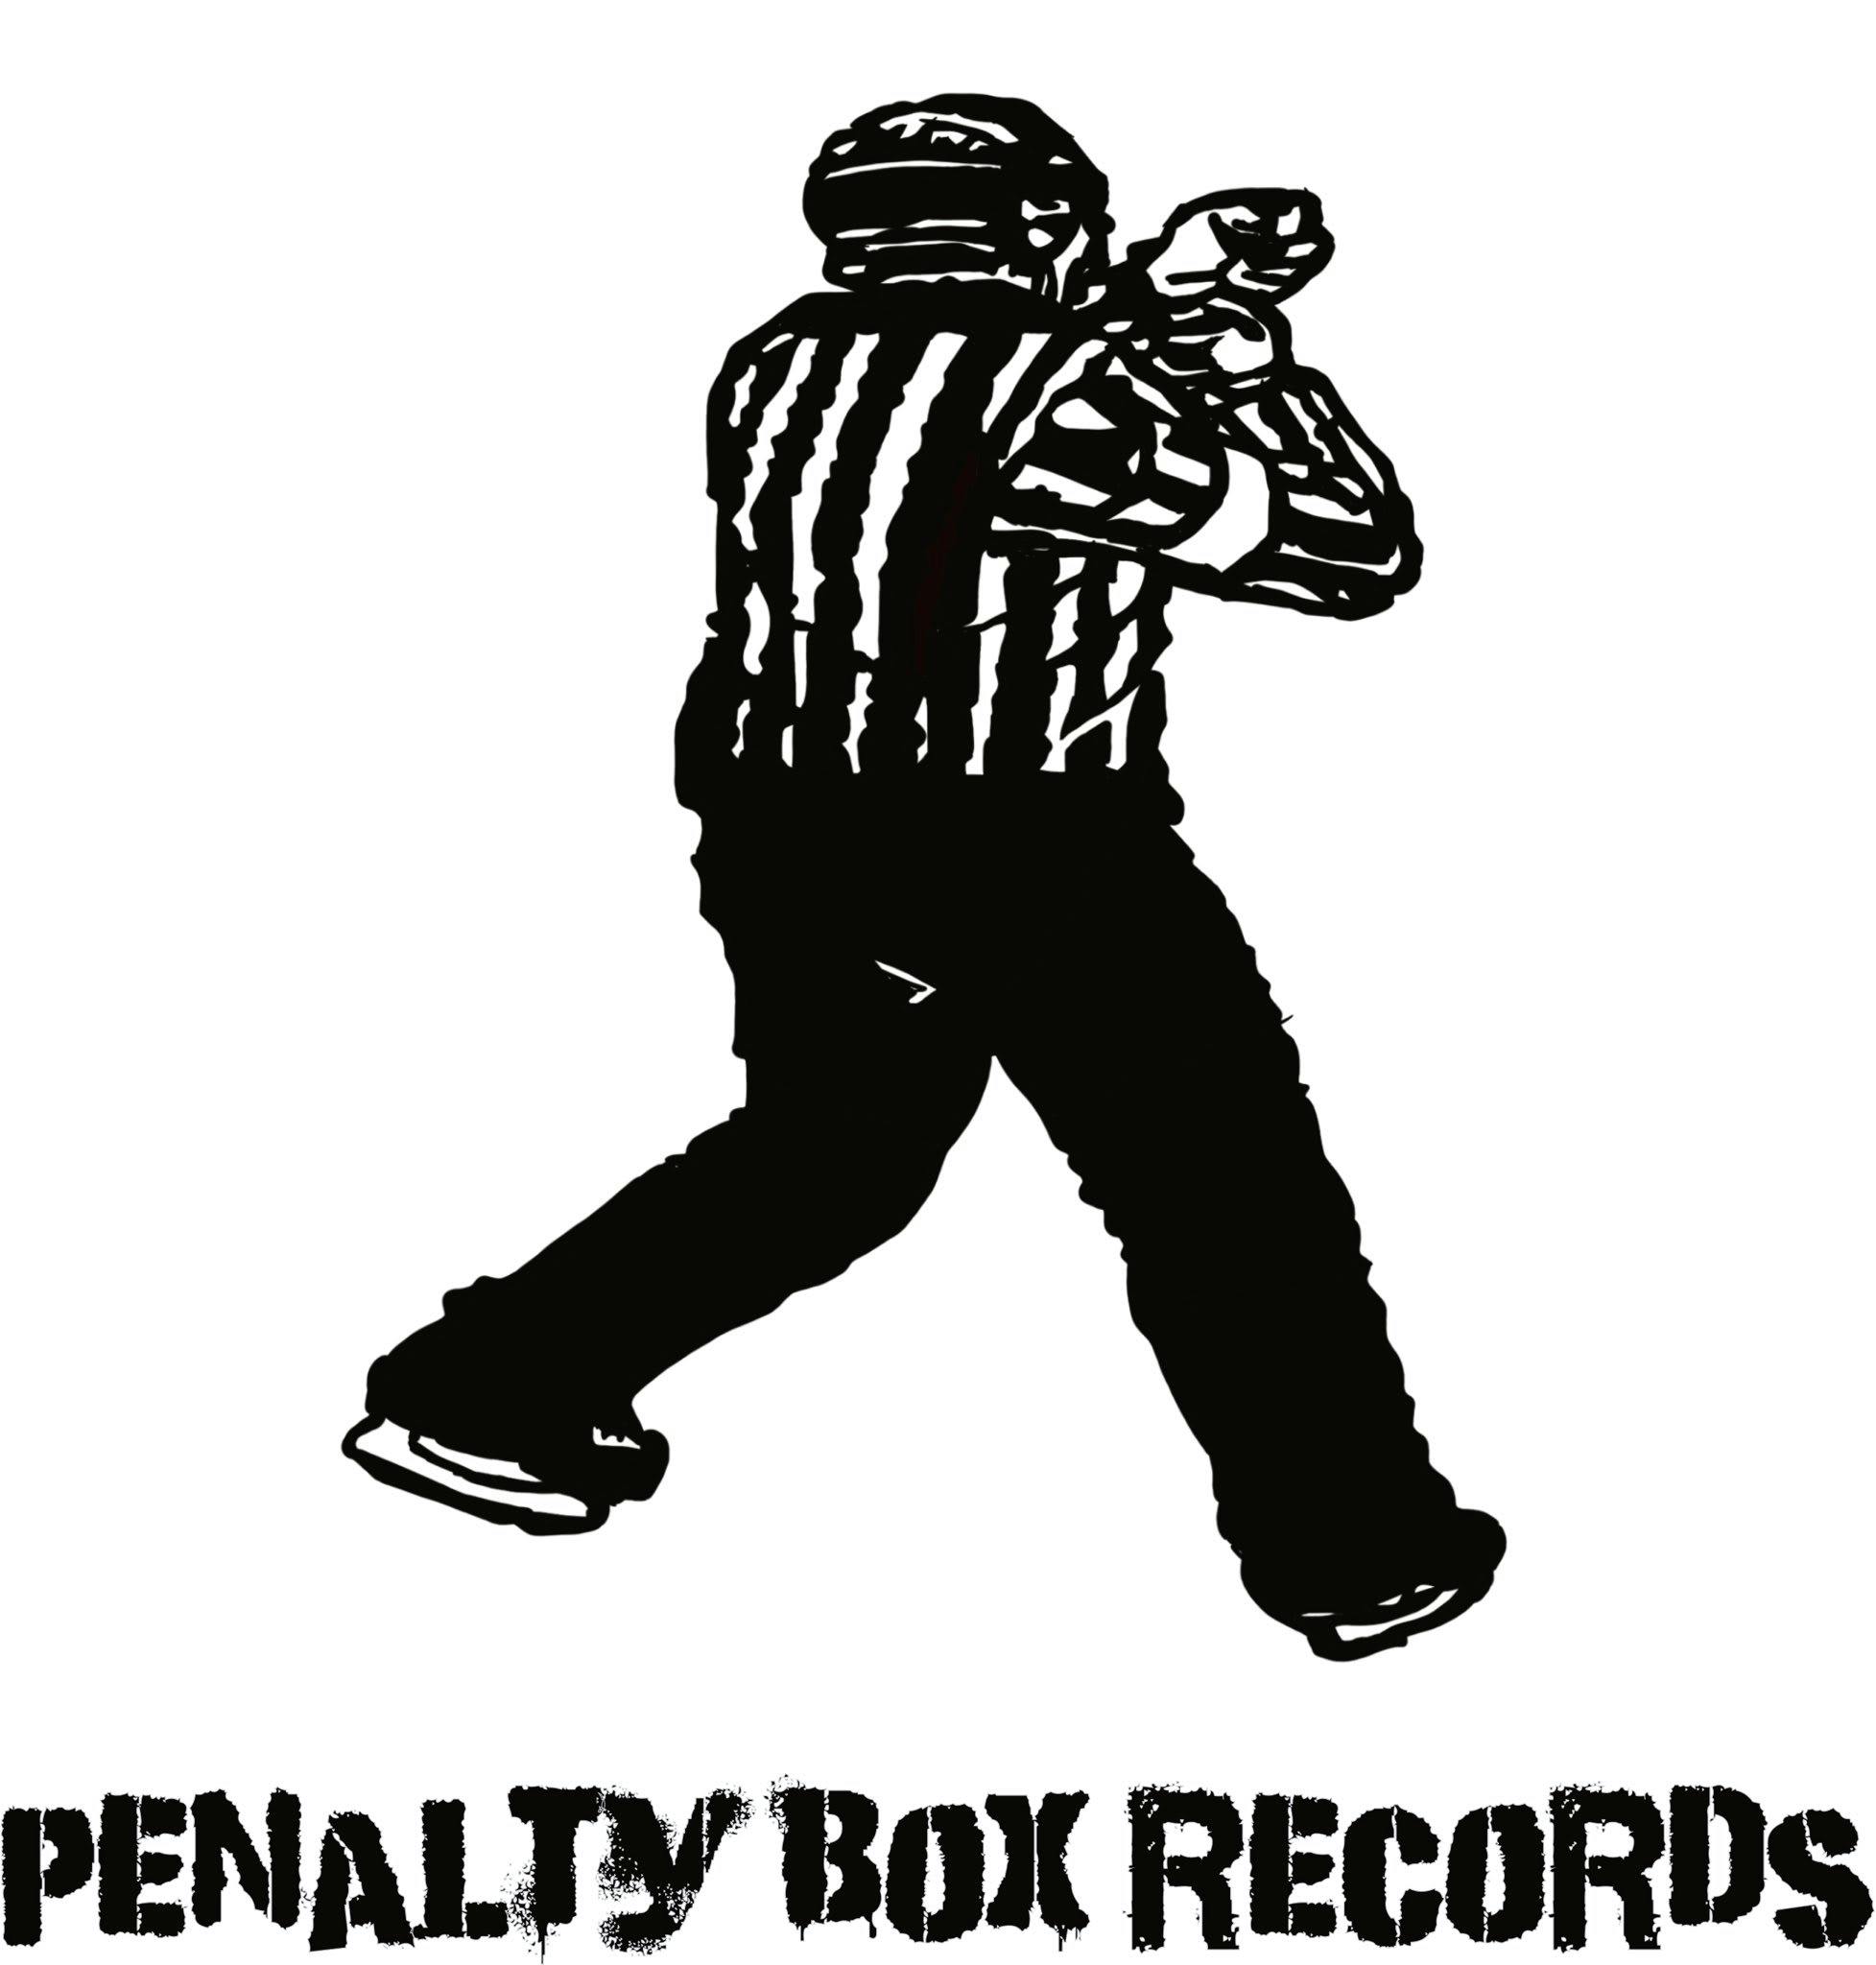 Penalty Box Records - Khilshot by Mike Booth